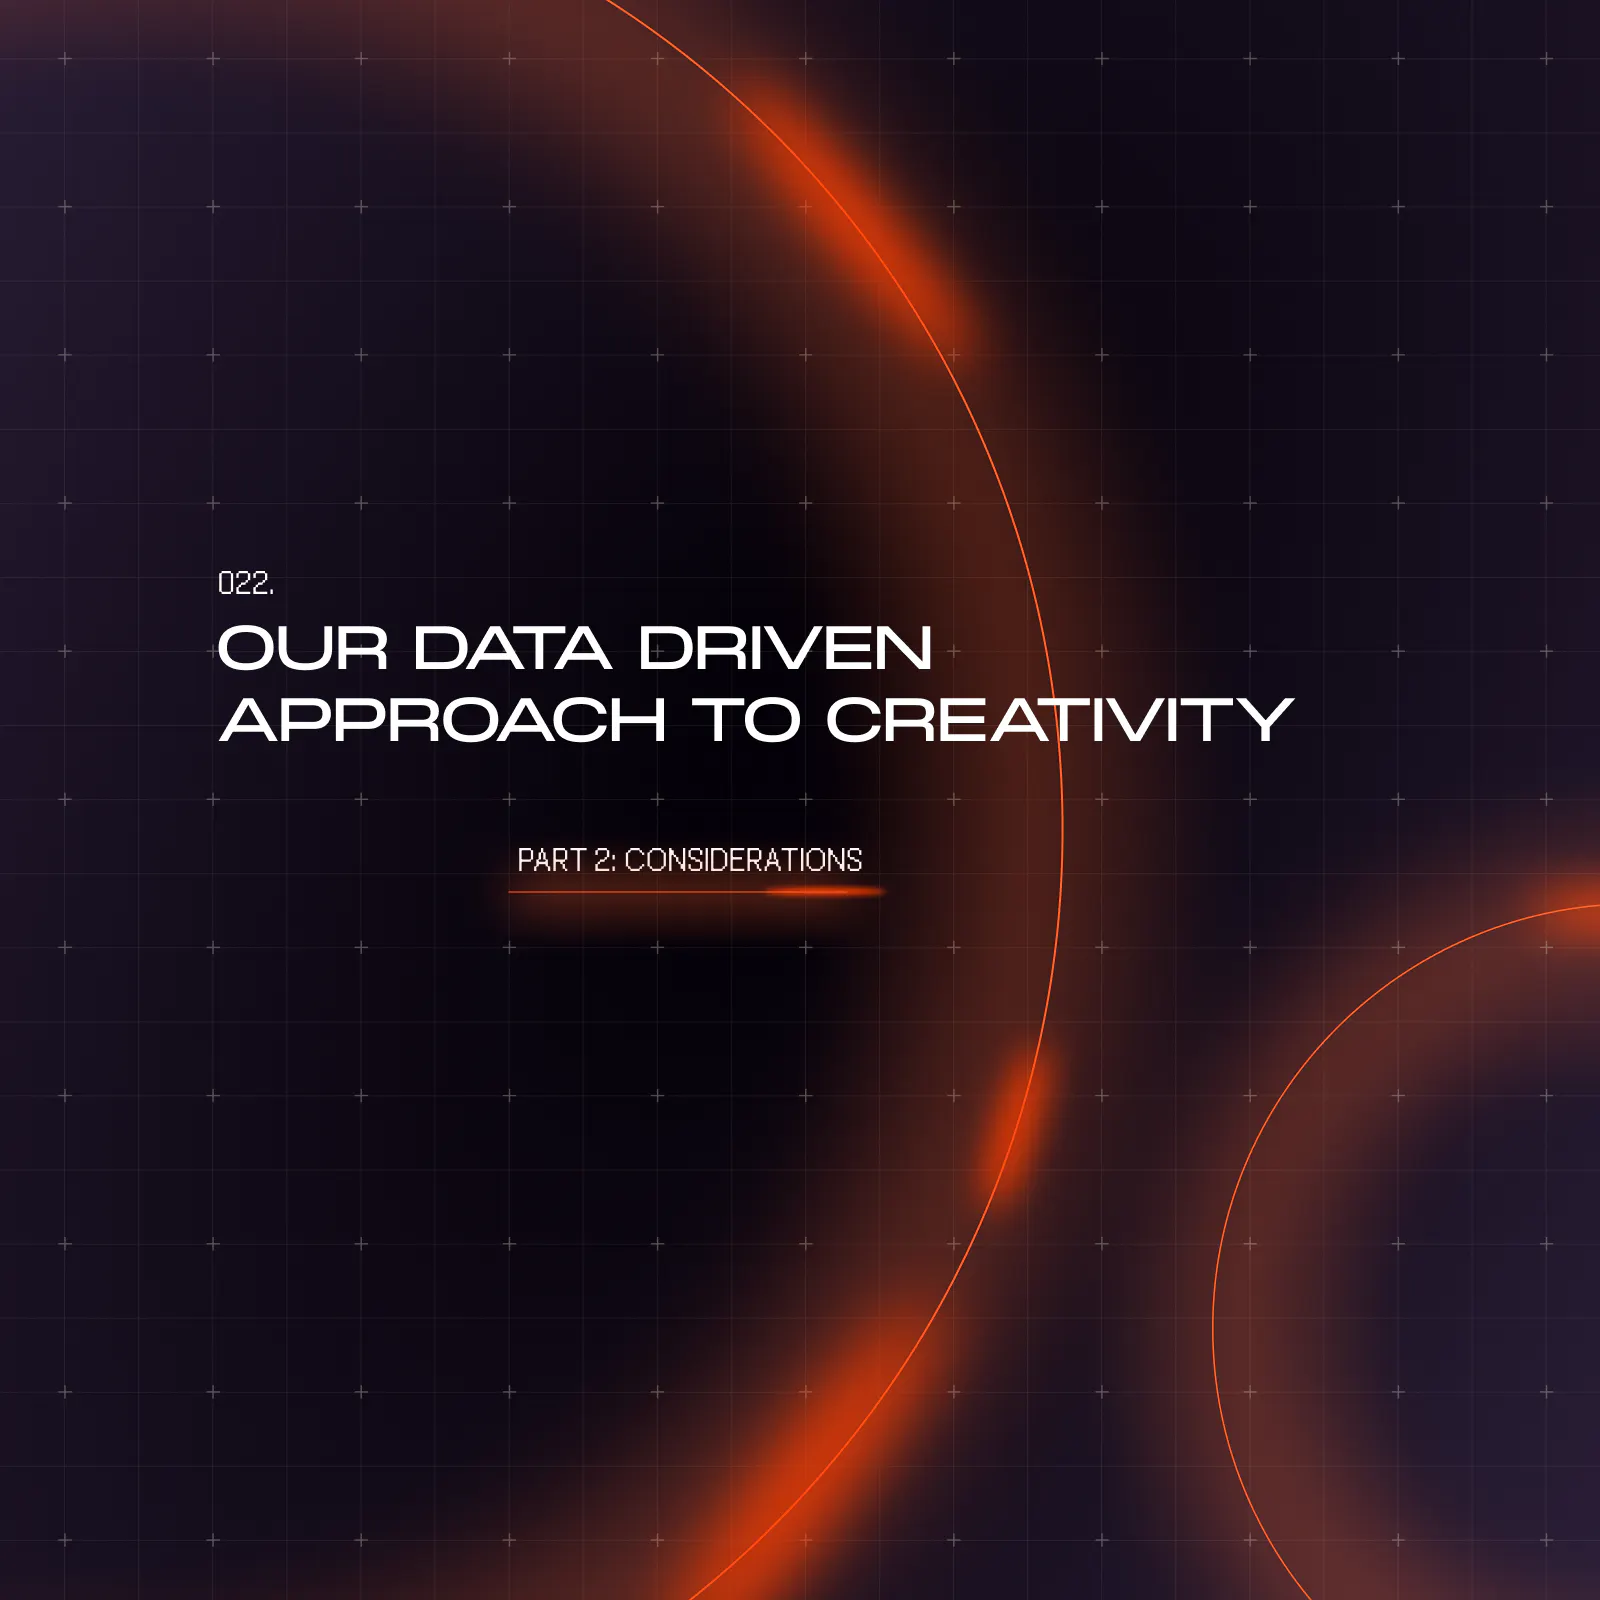 Our data driven approach to creativity text - Ideas (Ideas Page)